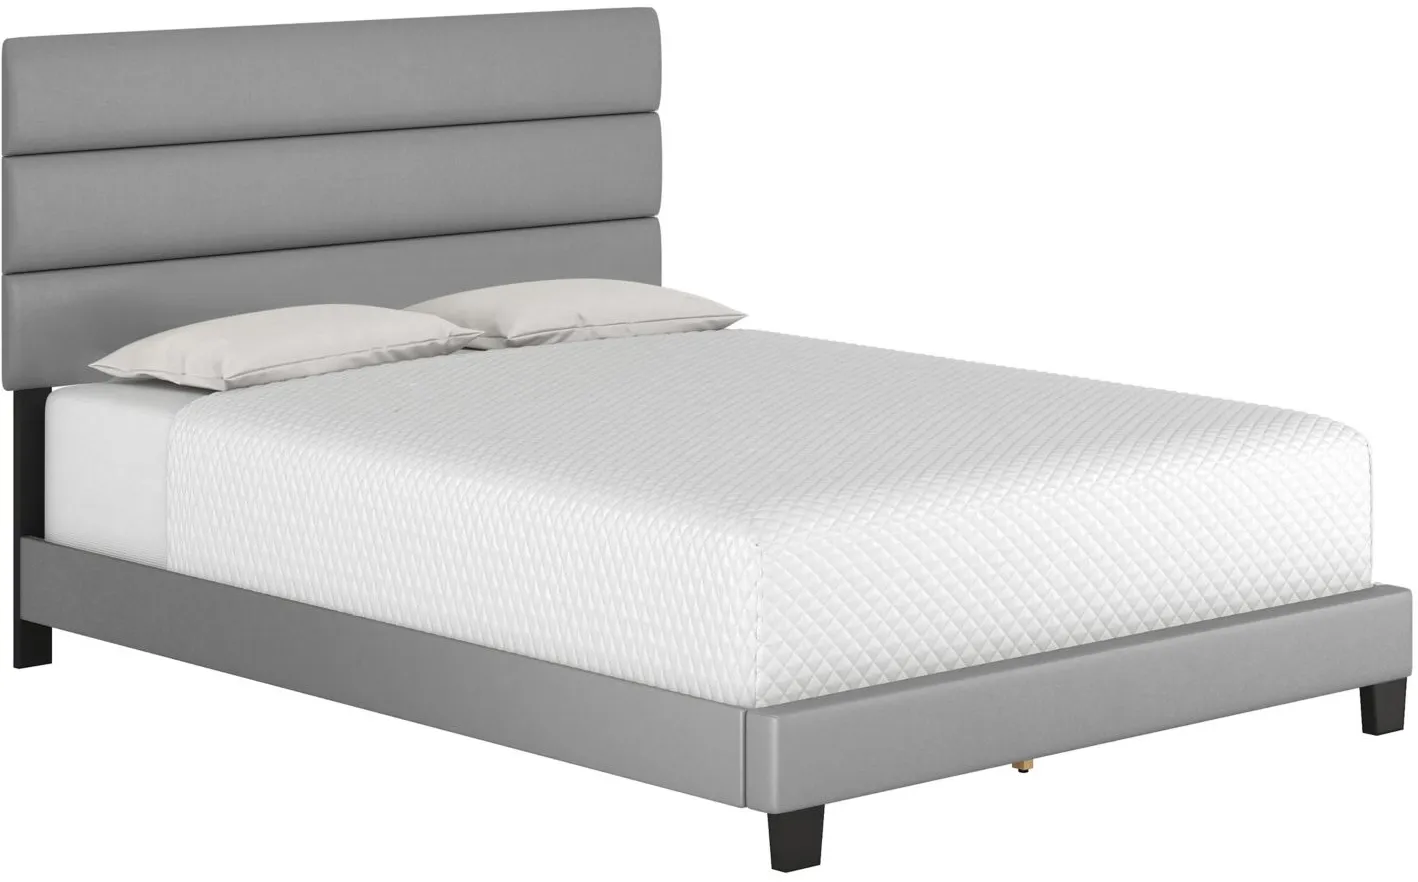 Parker Faux Leather Platform Bed in Gray by Boyd Flotation